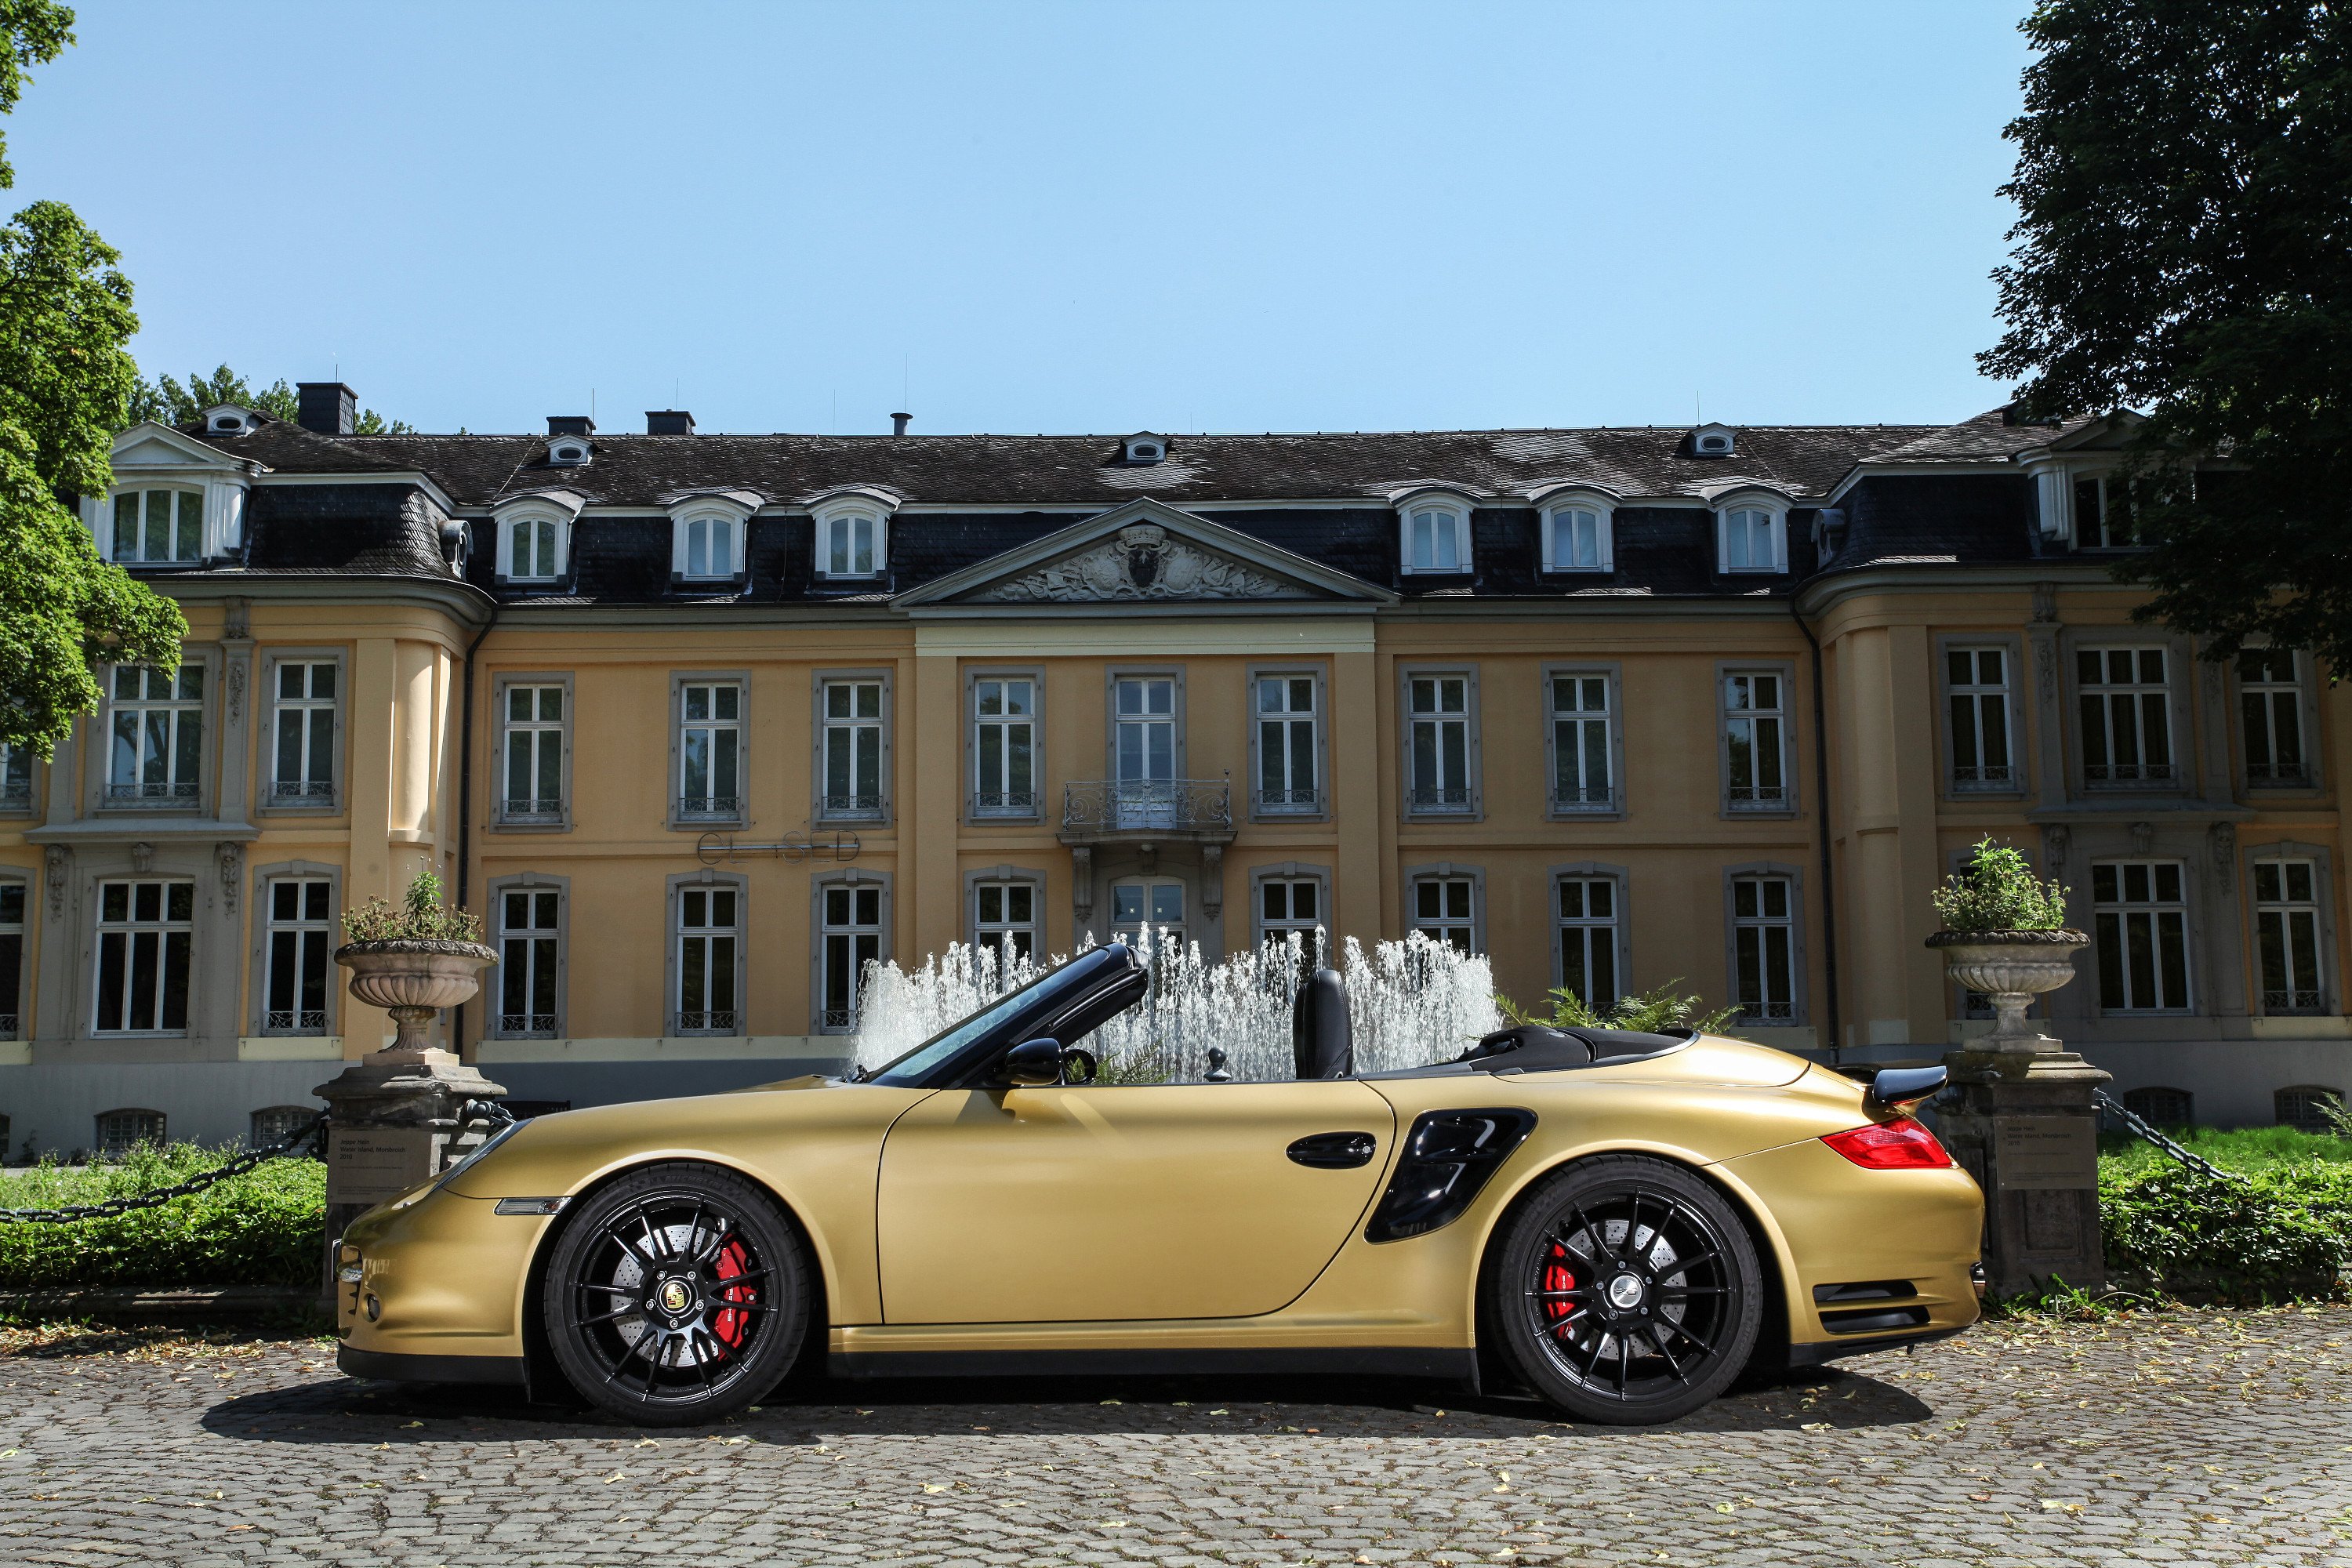 2016, Wimmer, Rs, Porsche, 911, Turbo, Cabriolet, 997, R s, Tuning Wallpaper